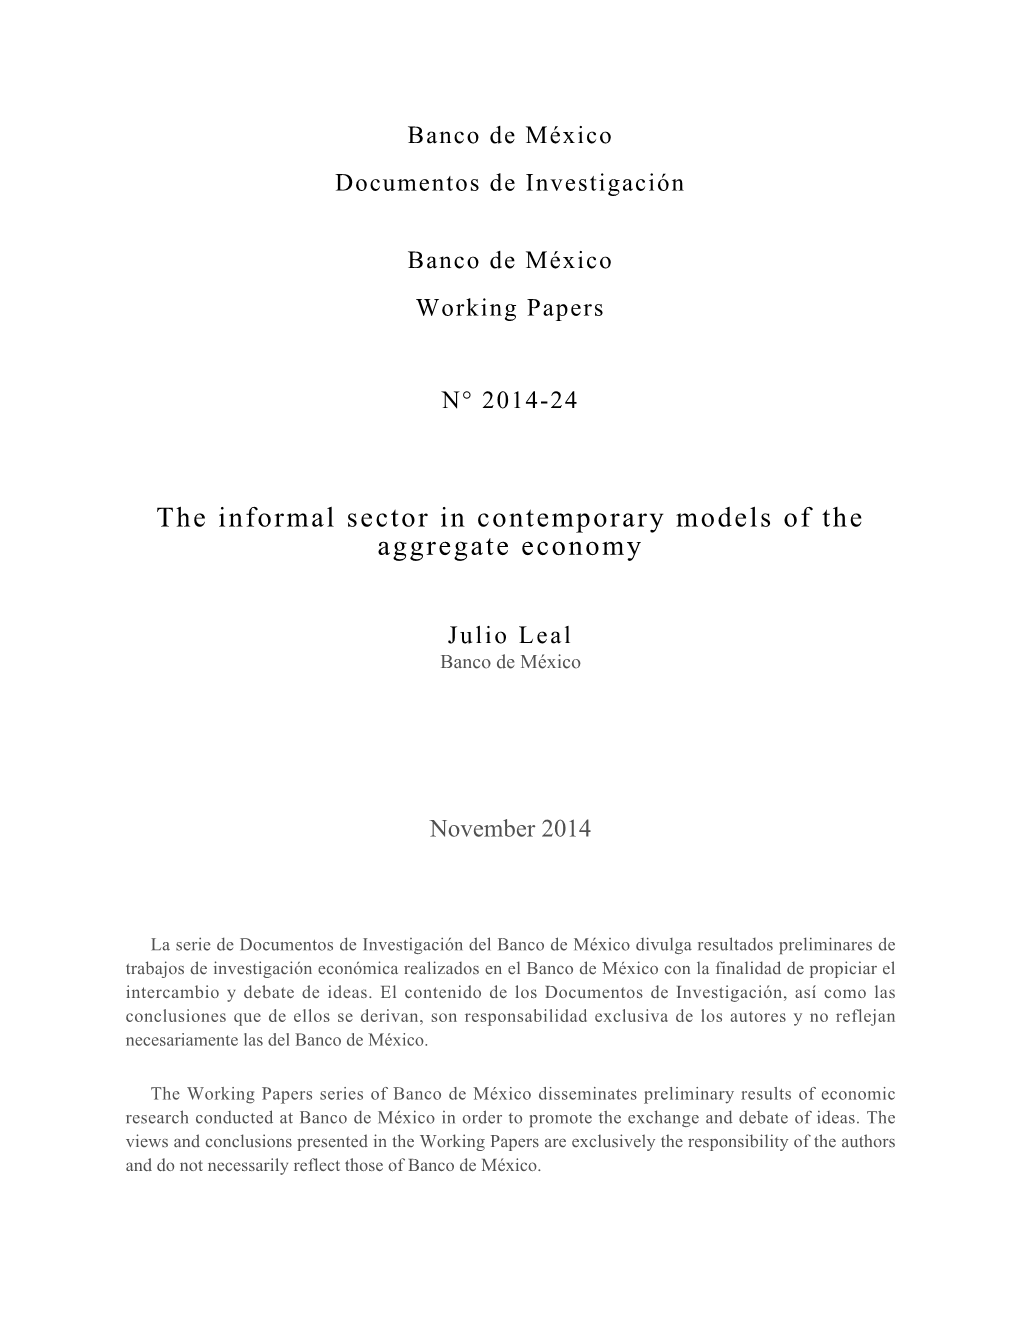 The Informal Sector in Contemporary Models of the Aggregate Economy